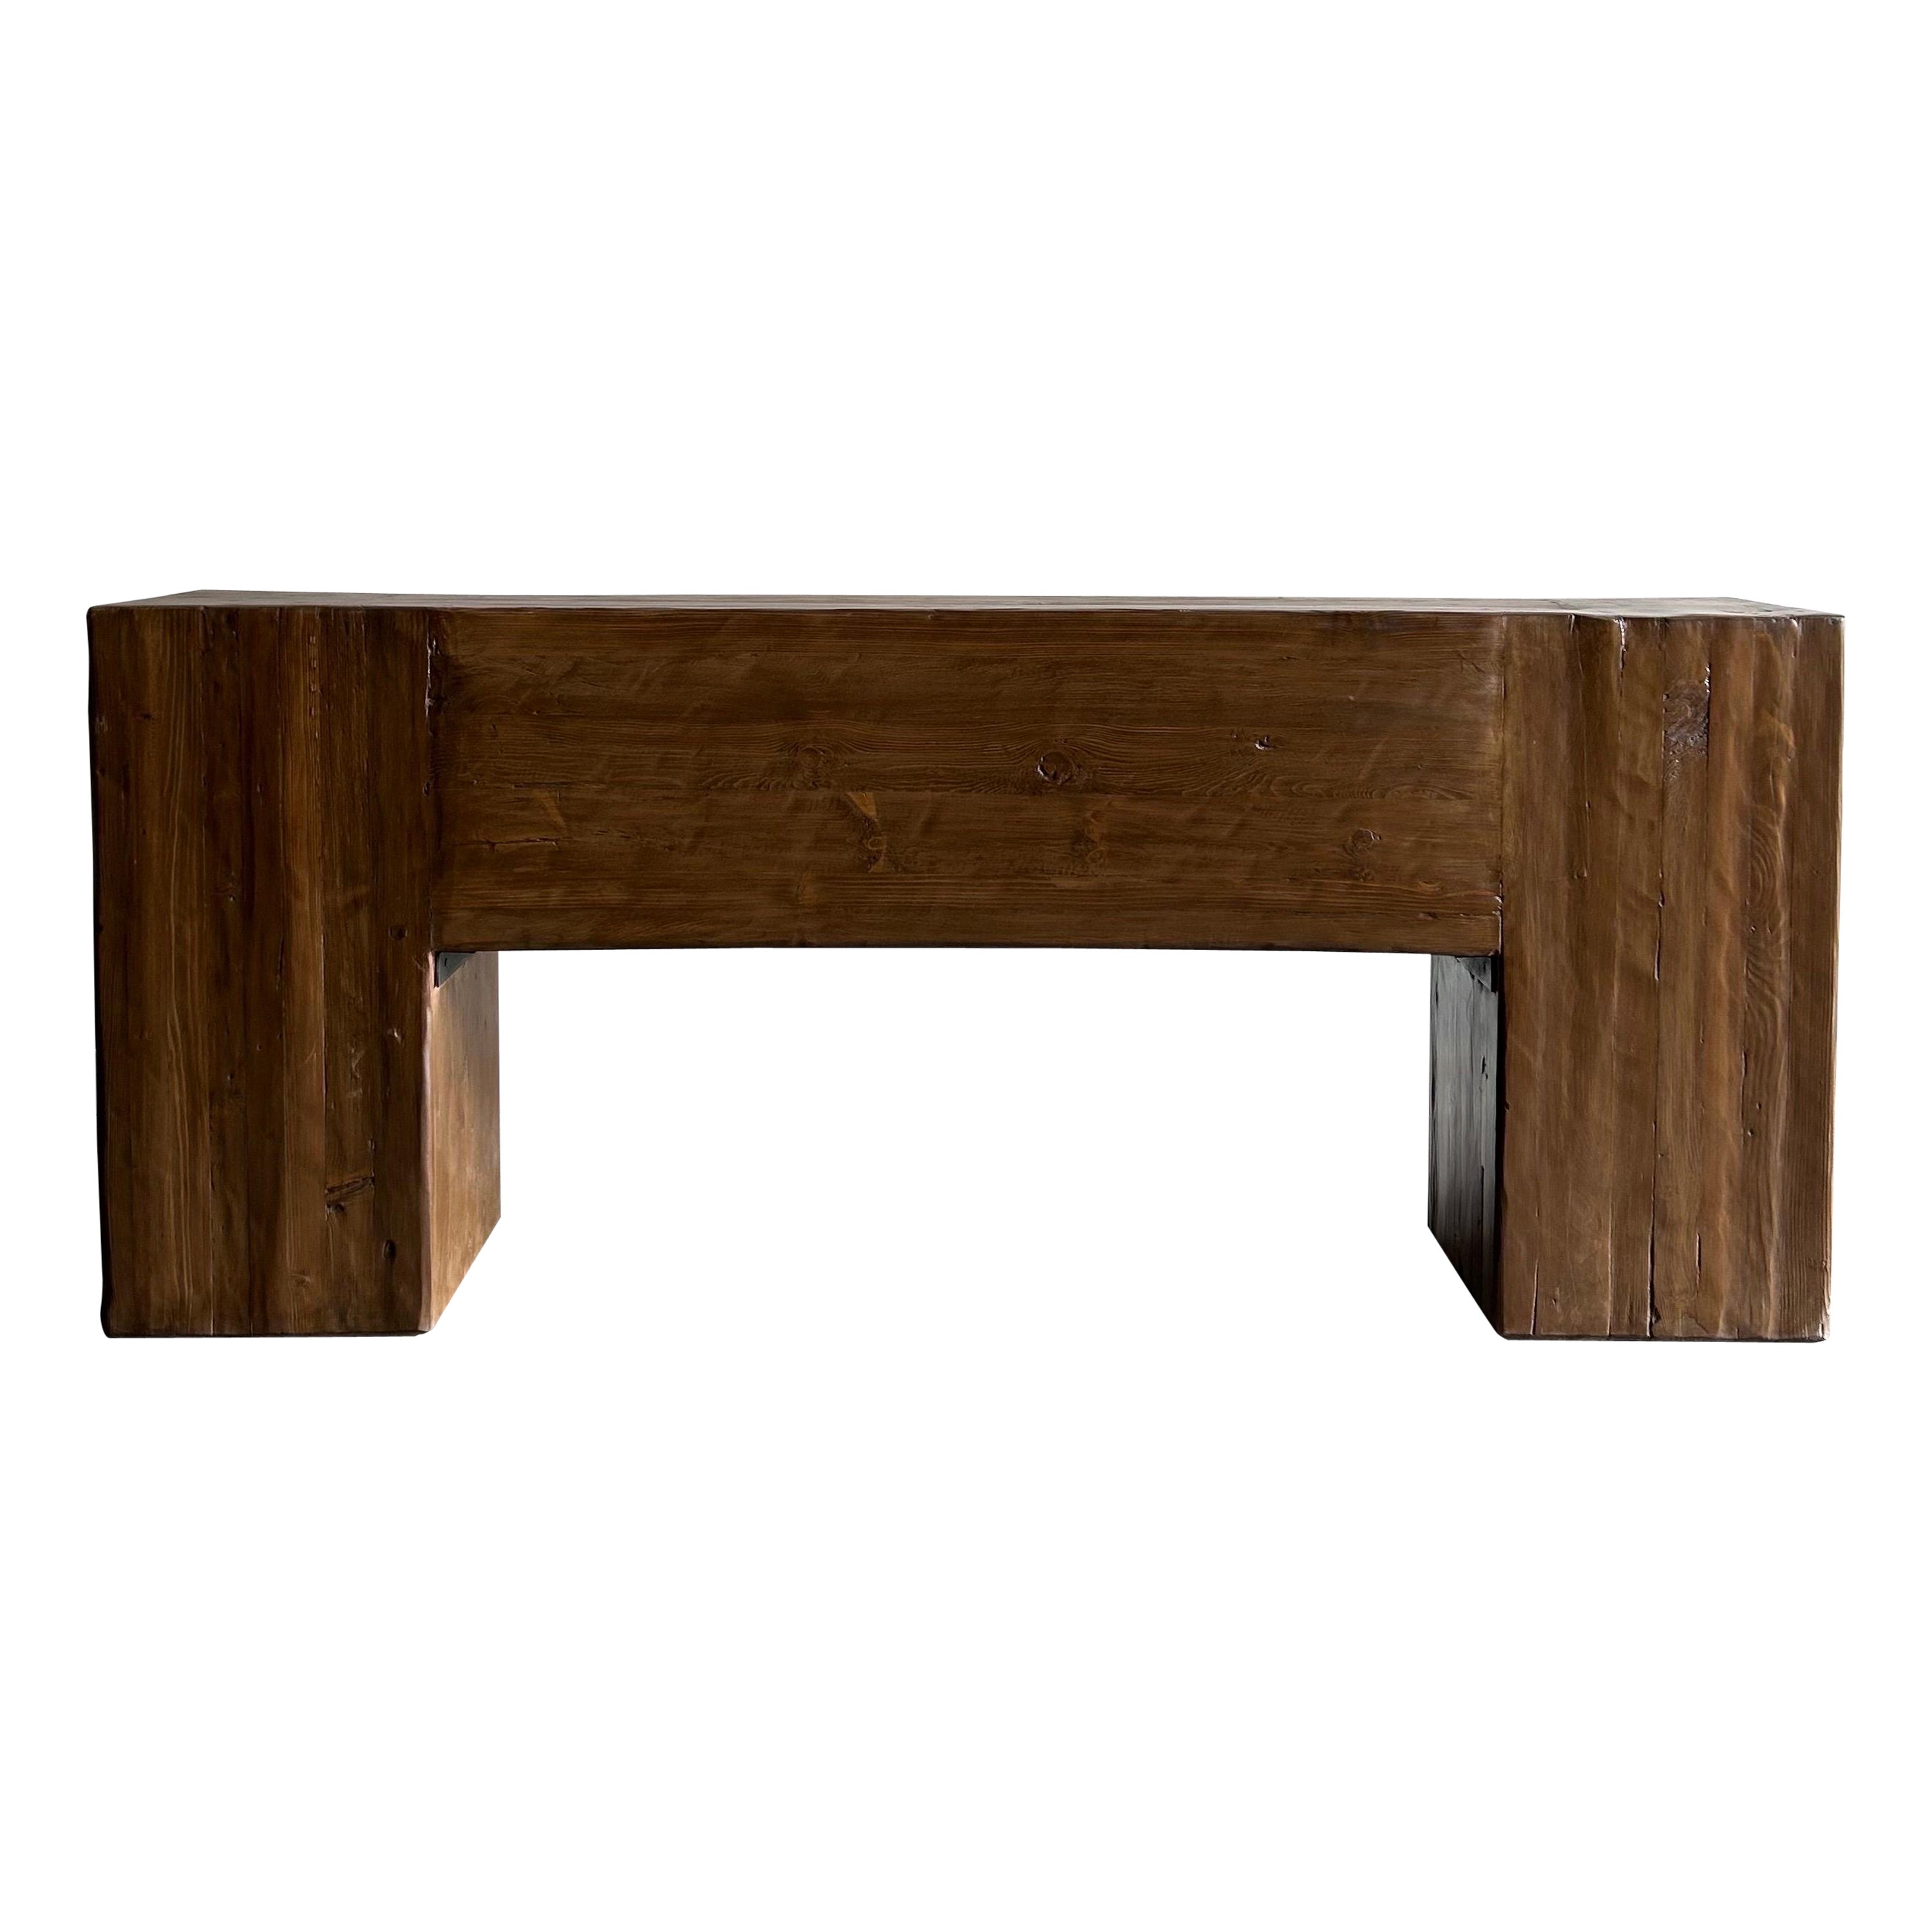 Reclaimed Wood Beam Console Table in Walnut Finish